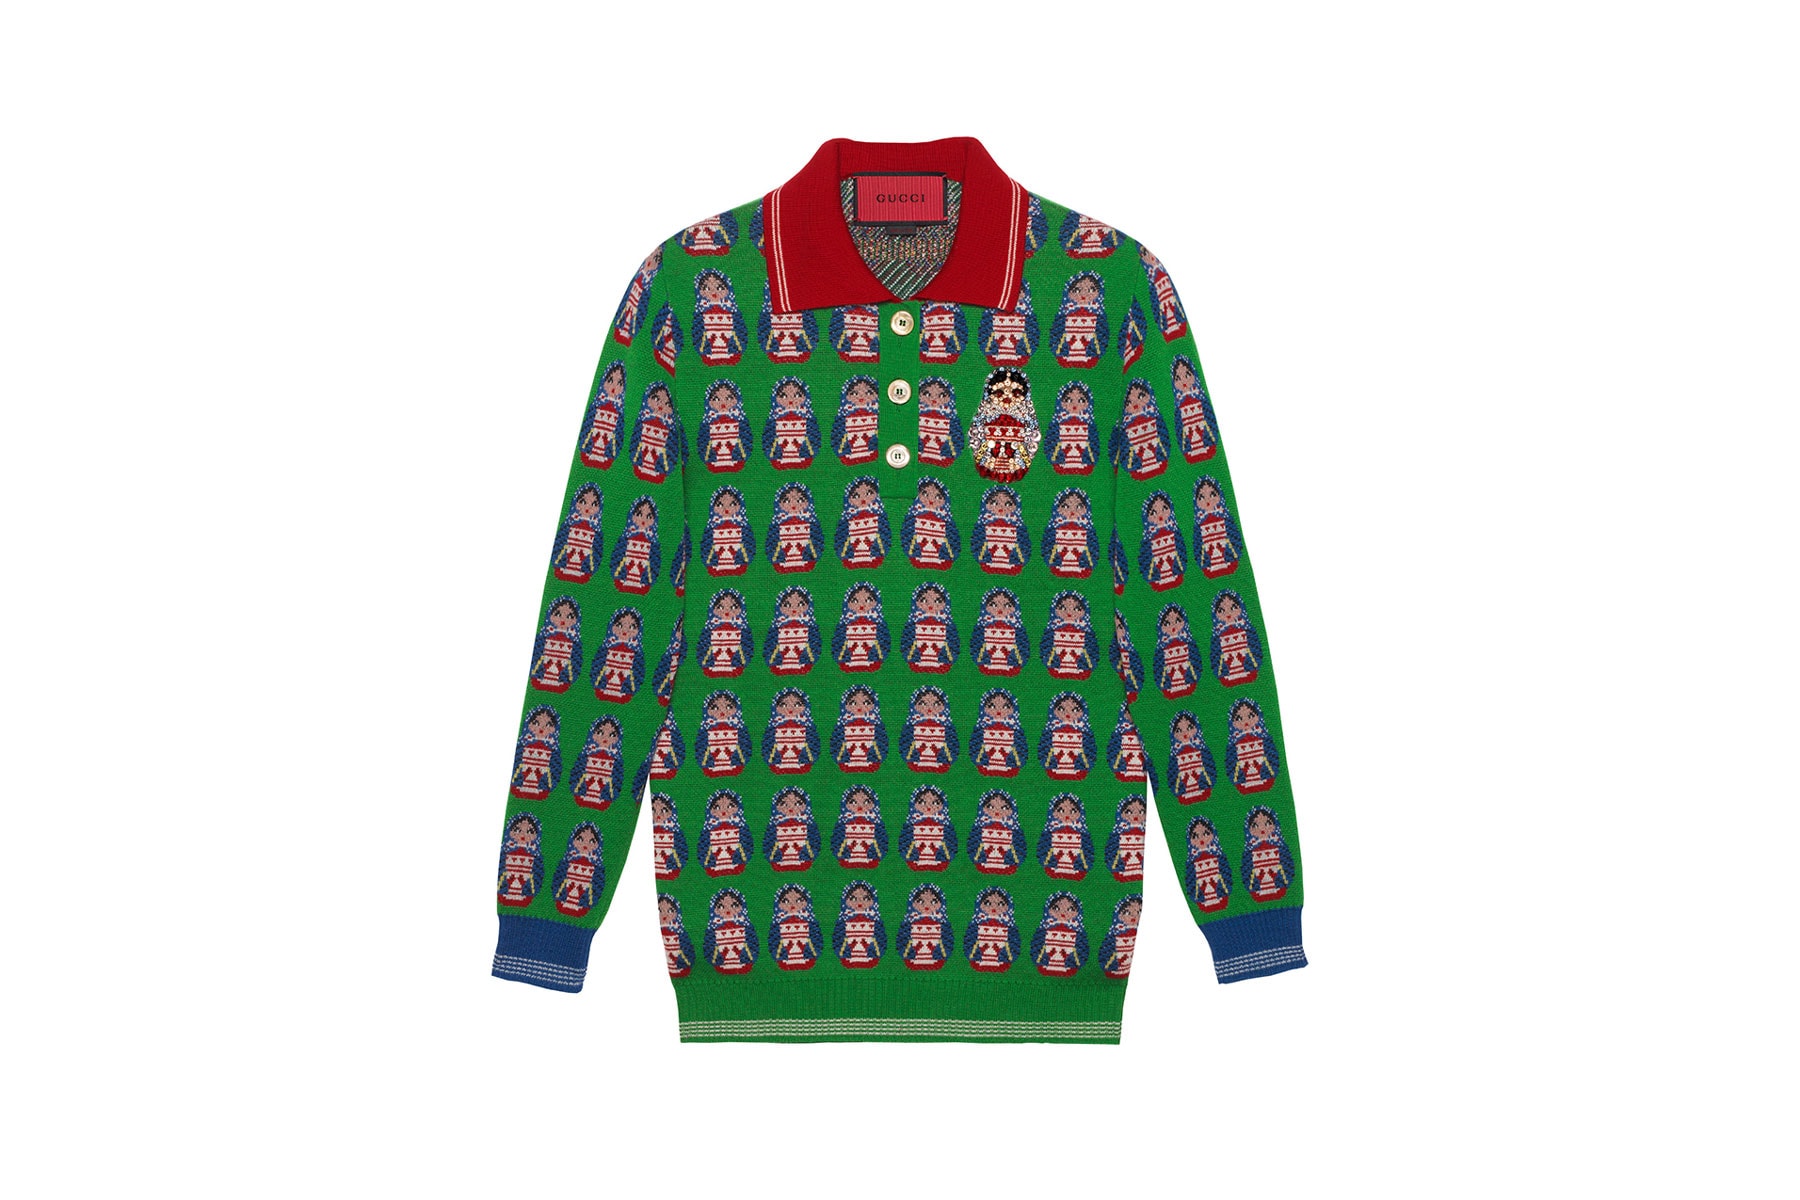 Gucci Pre-Fall 2018 Dover Street Market exclusives drop release collection july 14 2018 reopening buy purchase shop info decor sweater track jacket jersey shop store patches embroidery